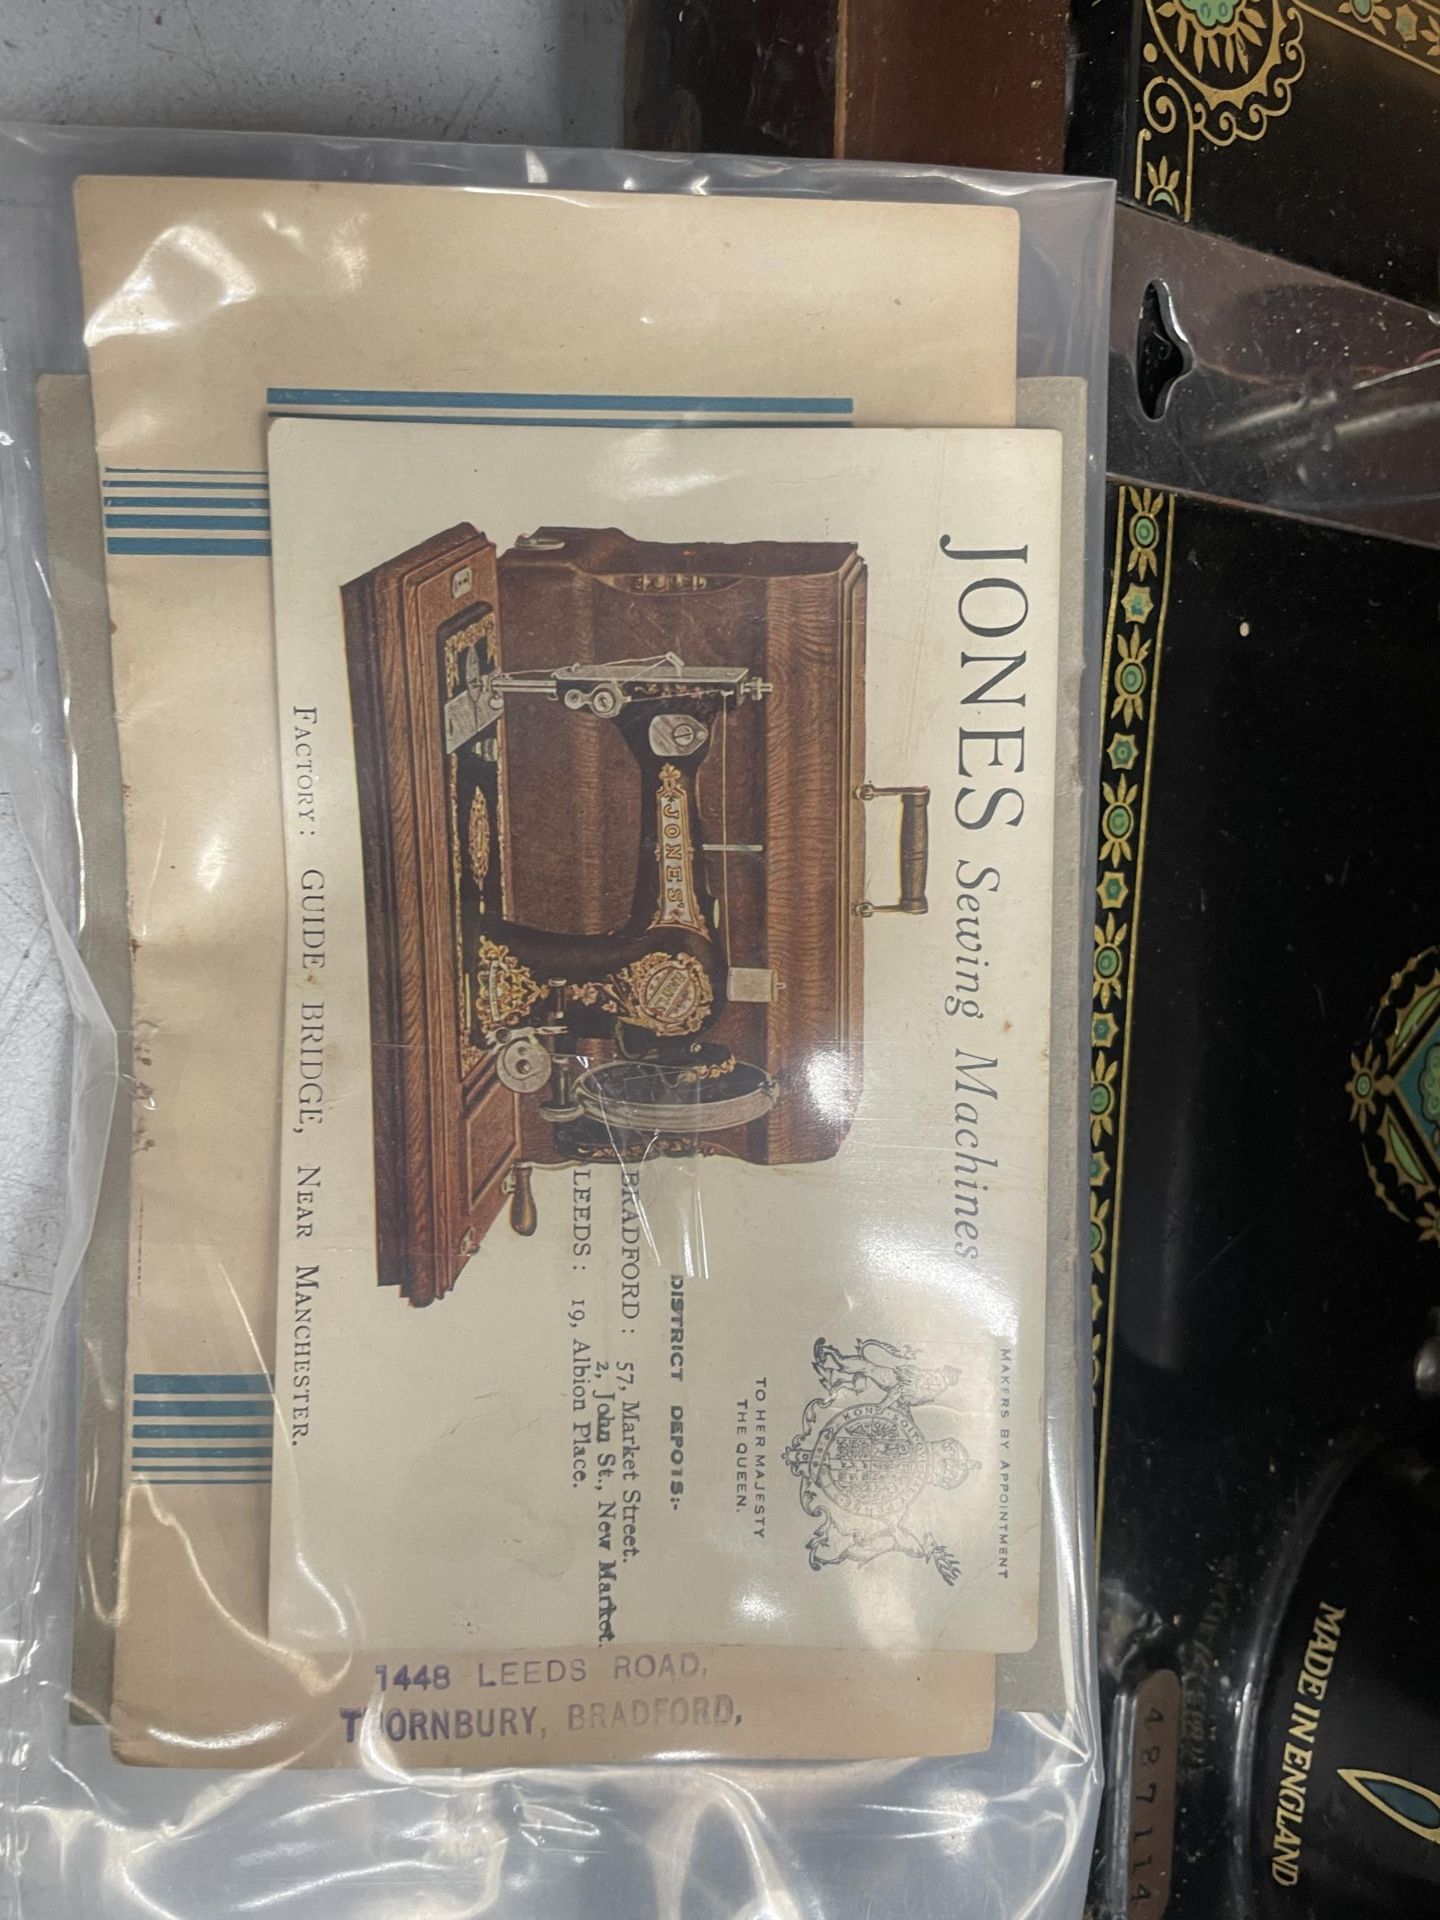 A VINTAGE CASED JONES SEWING MACHINE WITH ORIGINAL BOOKLET - Image 4 of 6